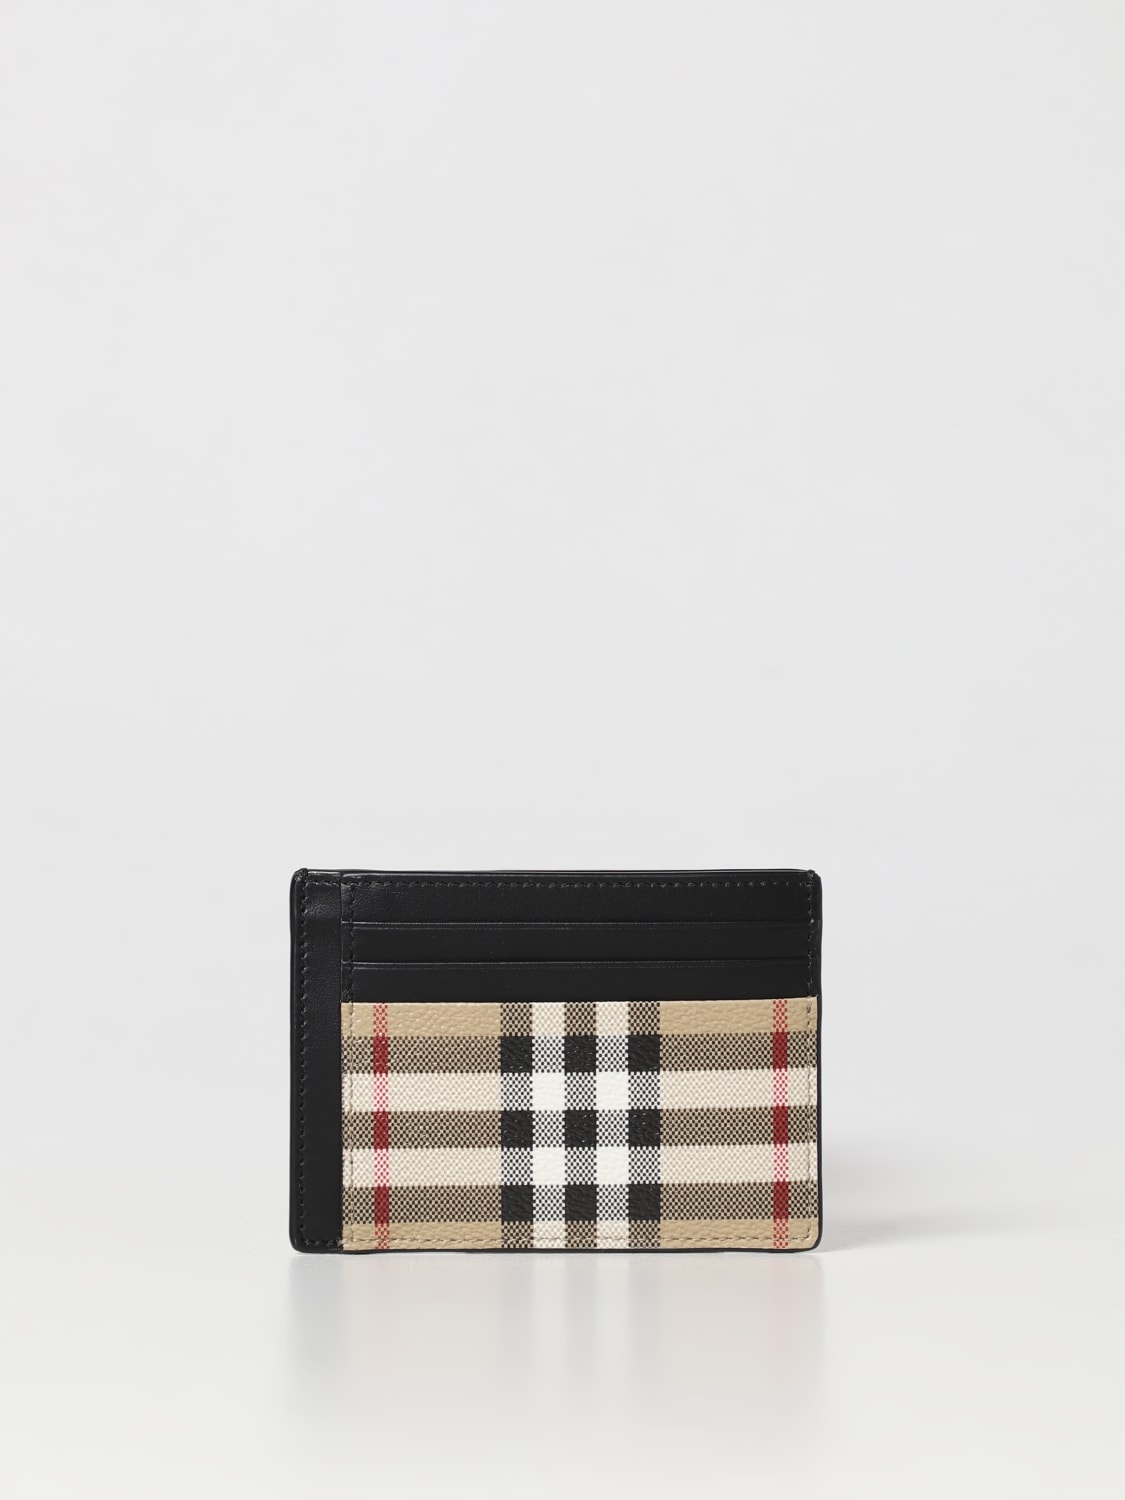 Burberry credit card holder in coated cotton and leather